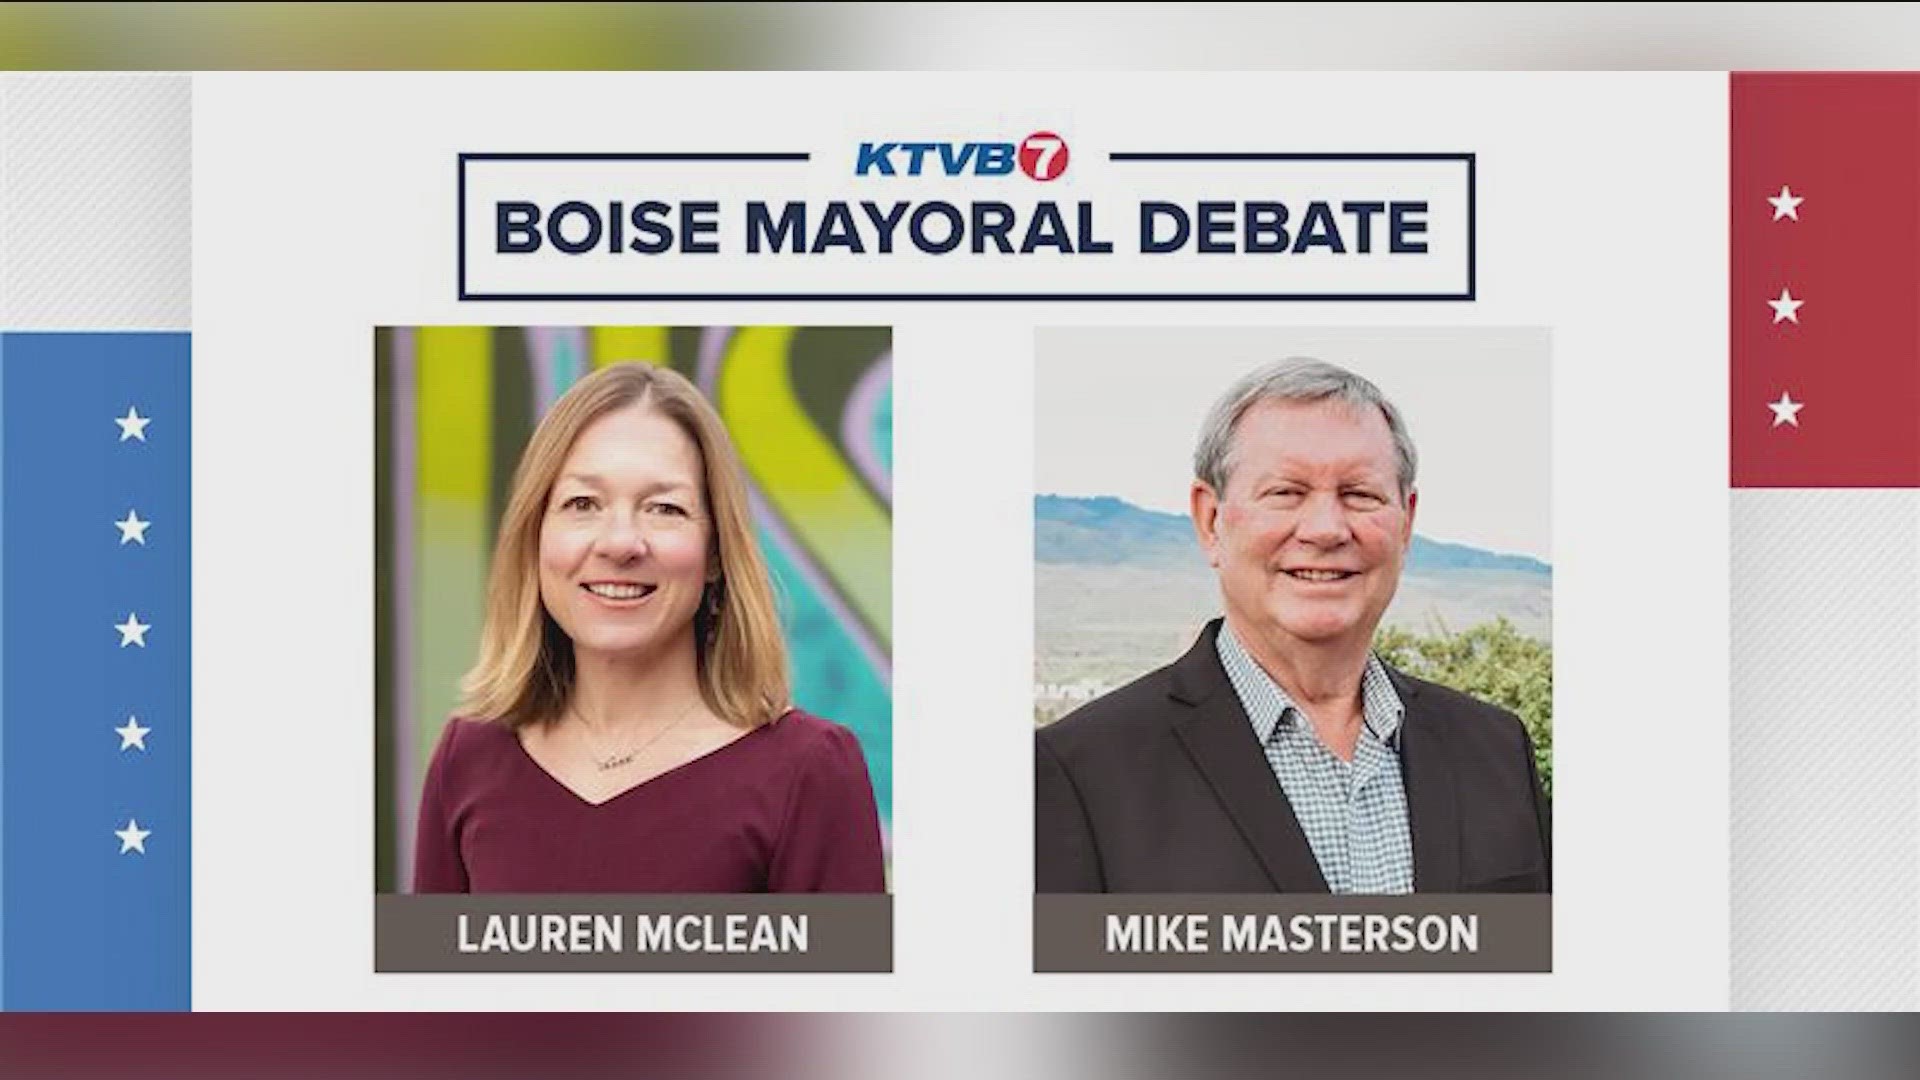 This Sunday on Viewpoint, host Joe Parris dives into the Boise Mayoral debate between Mayor Lauren McLean and challenger, Mike Masterson.